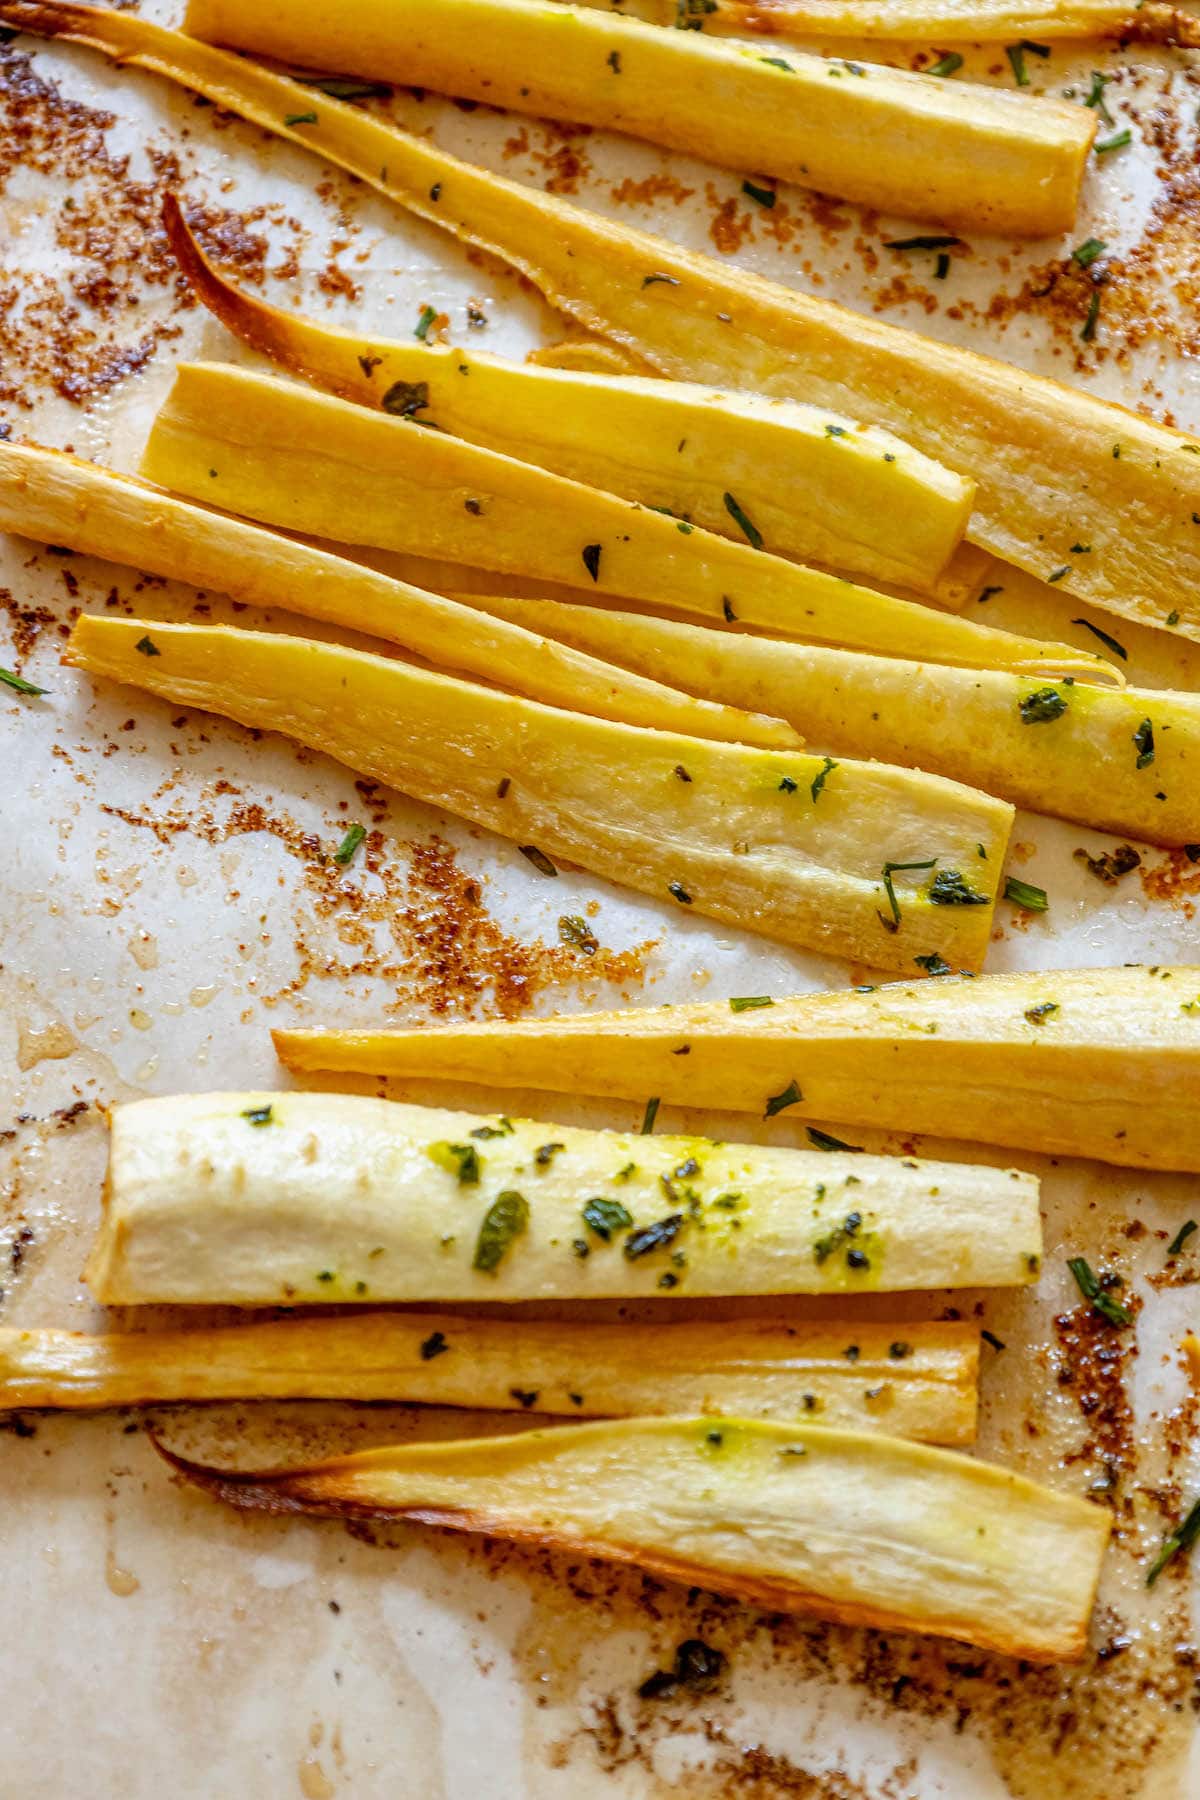 roasted parsnips seasoned with garlic butter and herbs on a baking sheet lined with parchment paper